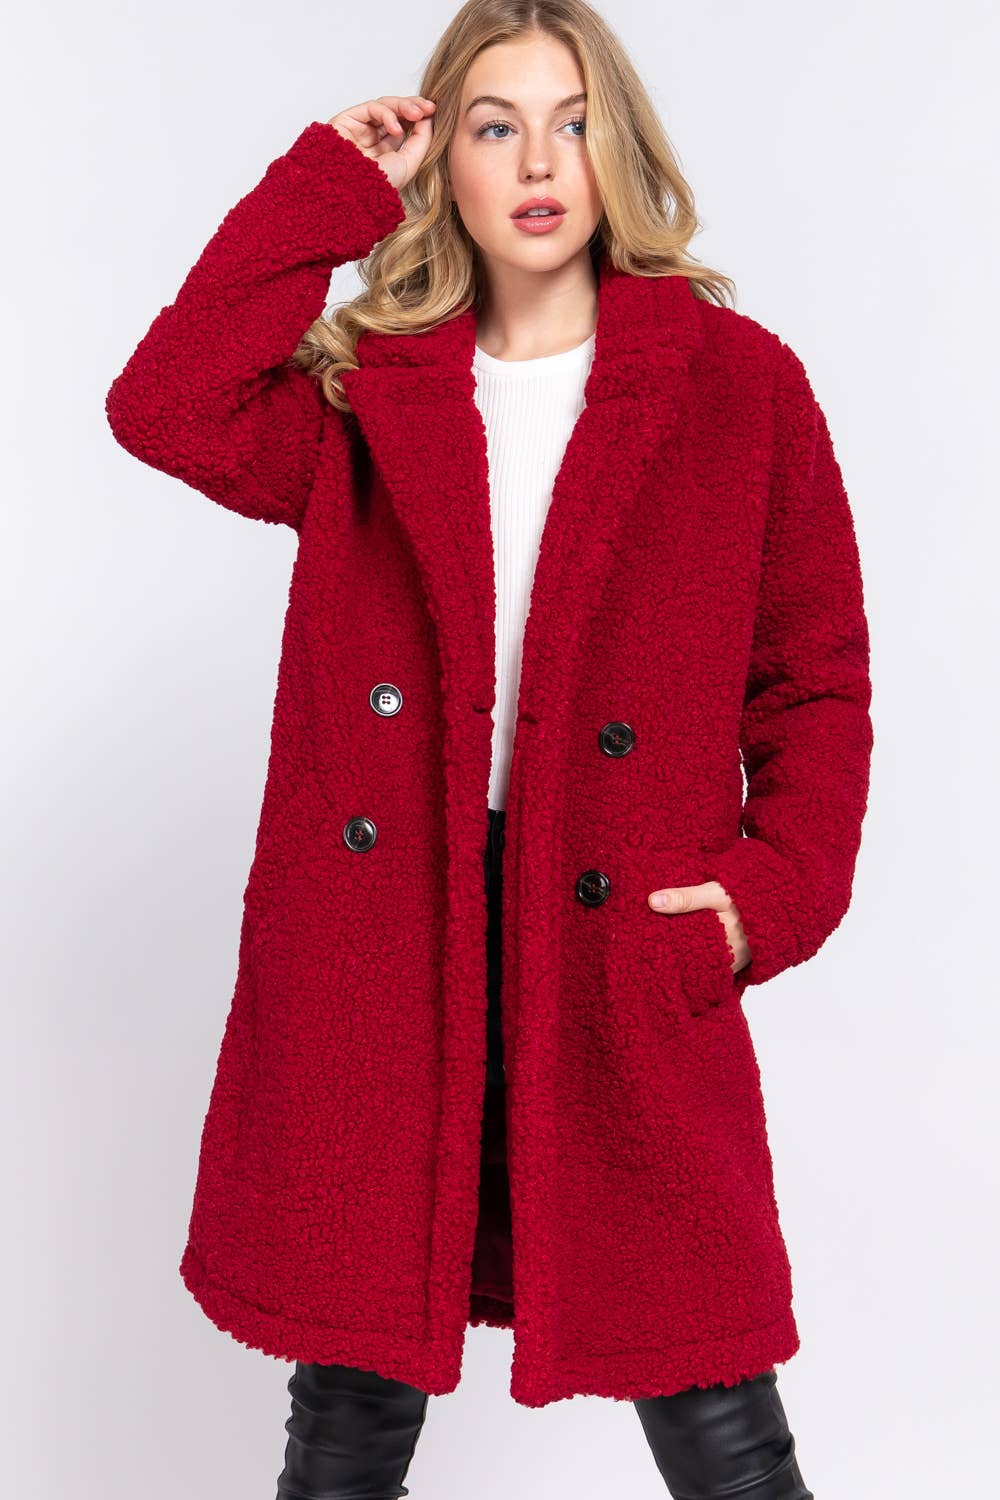 SLIM FIT LONG SLEEVE DOUBLE BREASTED TEDDY COAT: RED